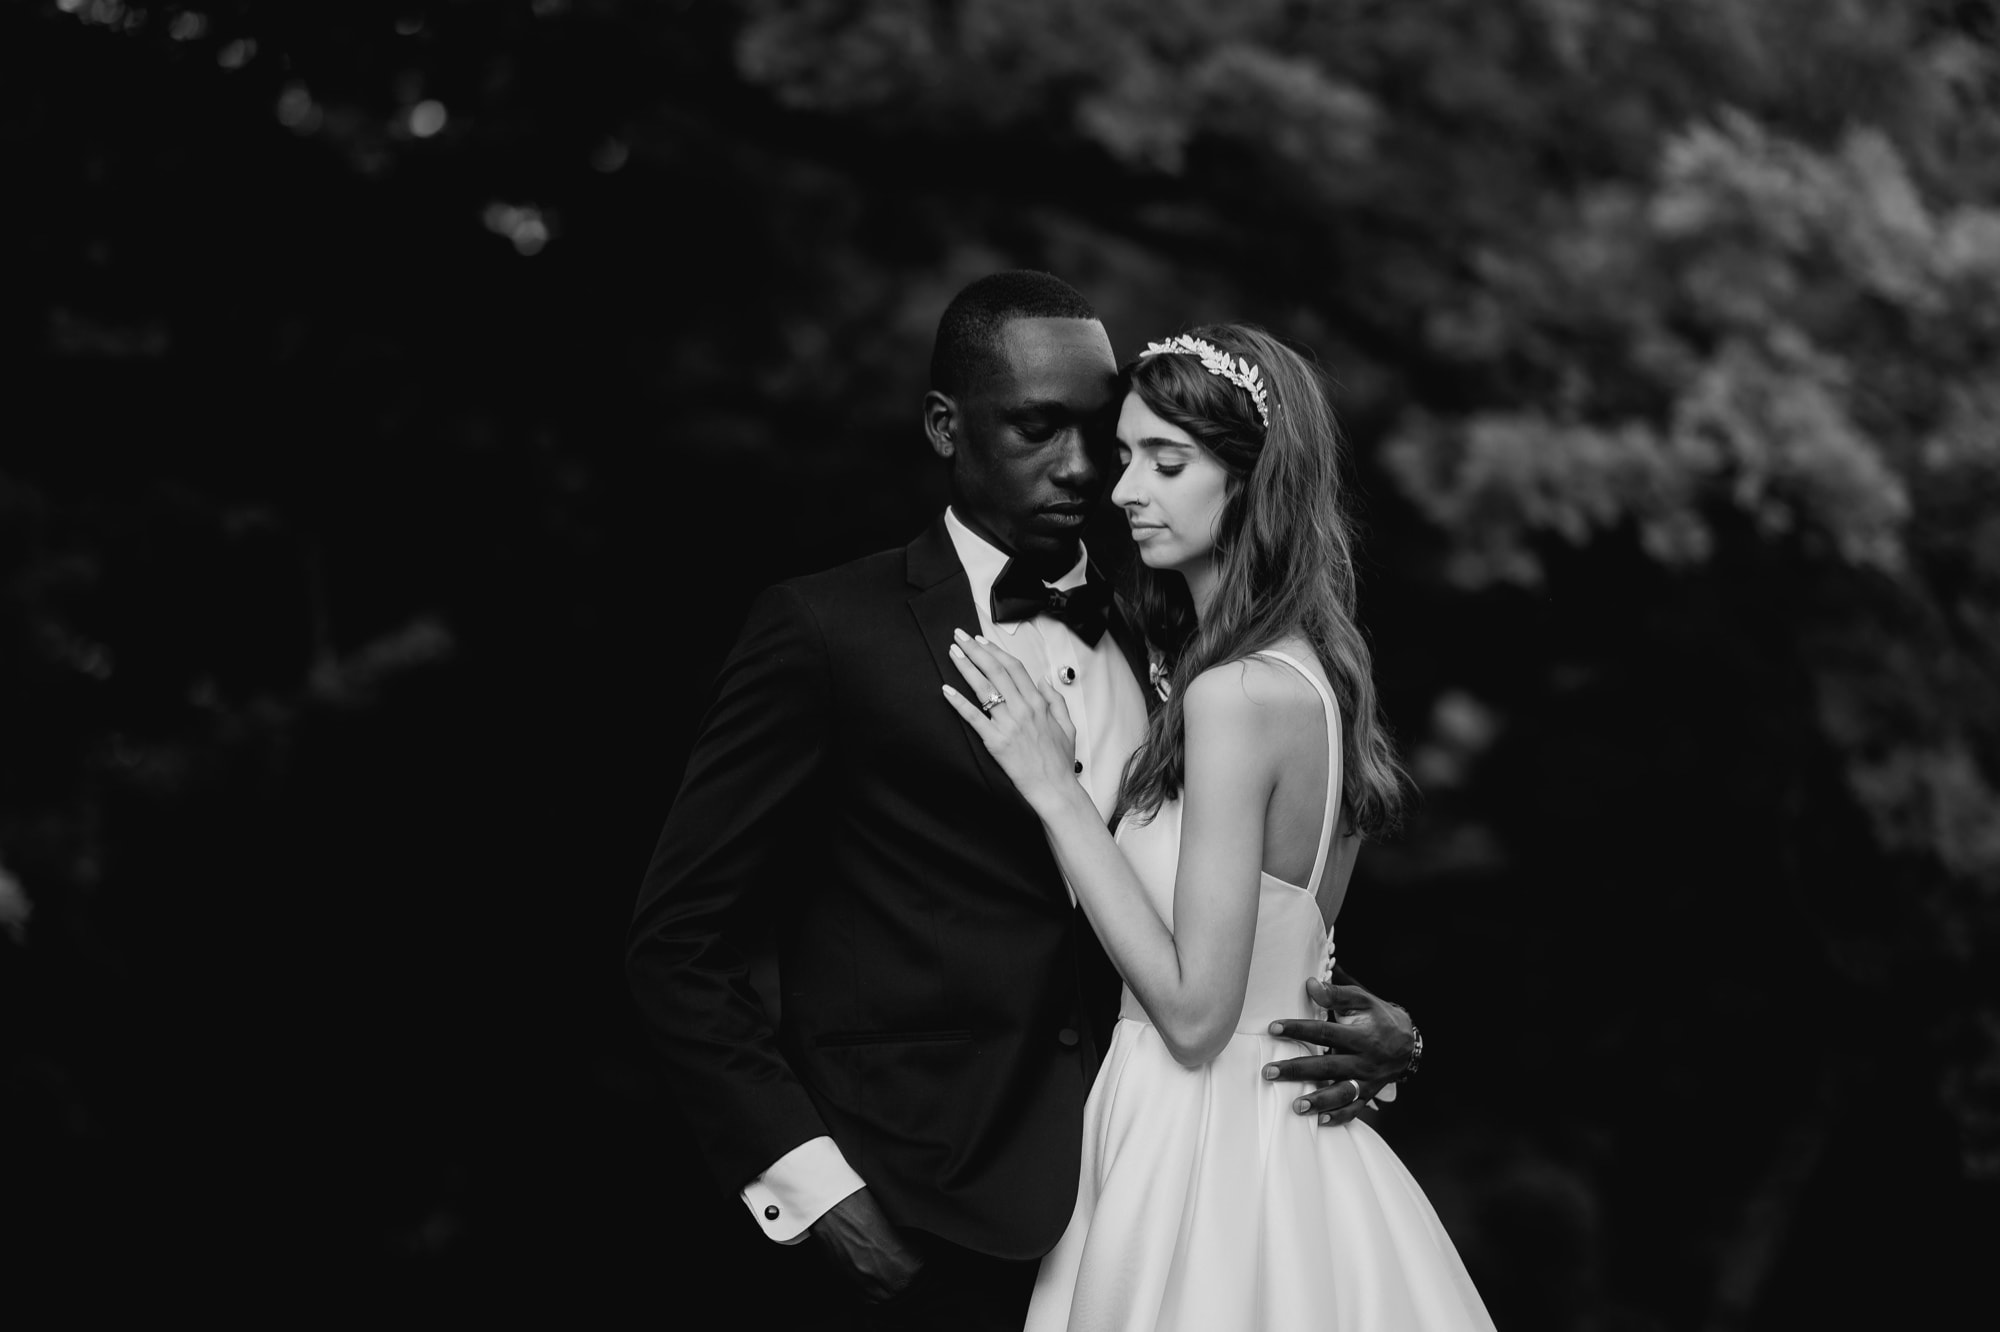 Romantic bride and groom portrait in black and white